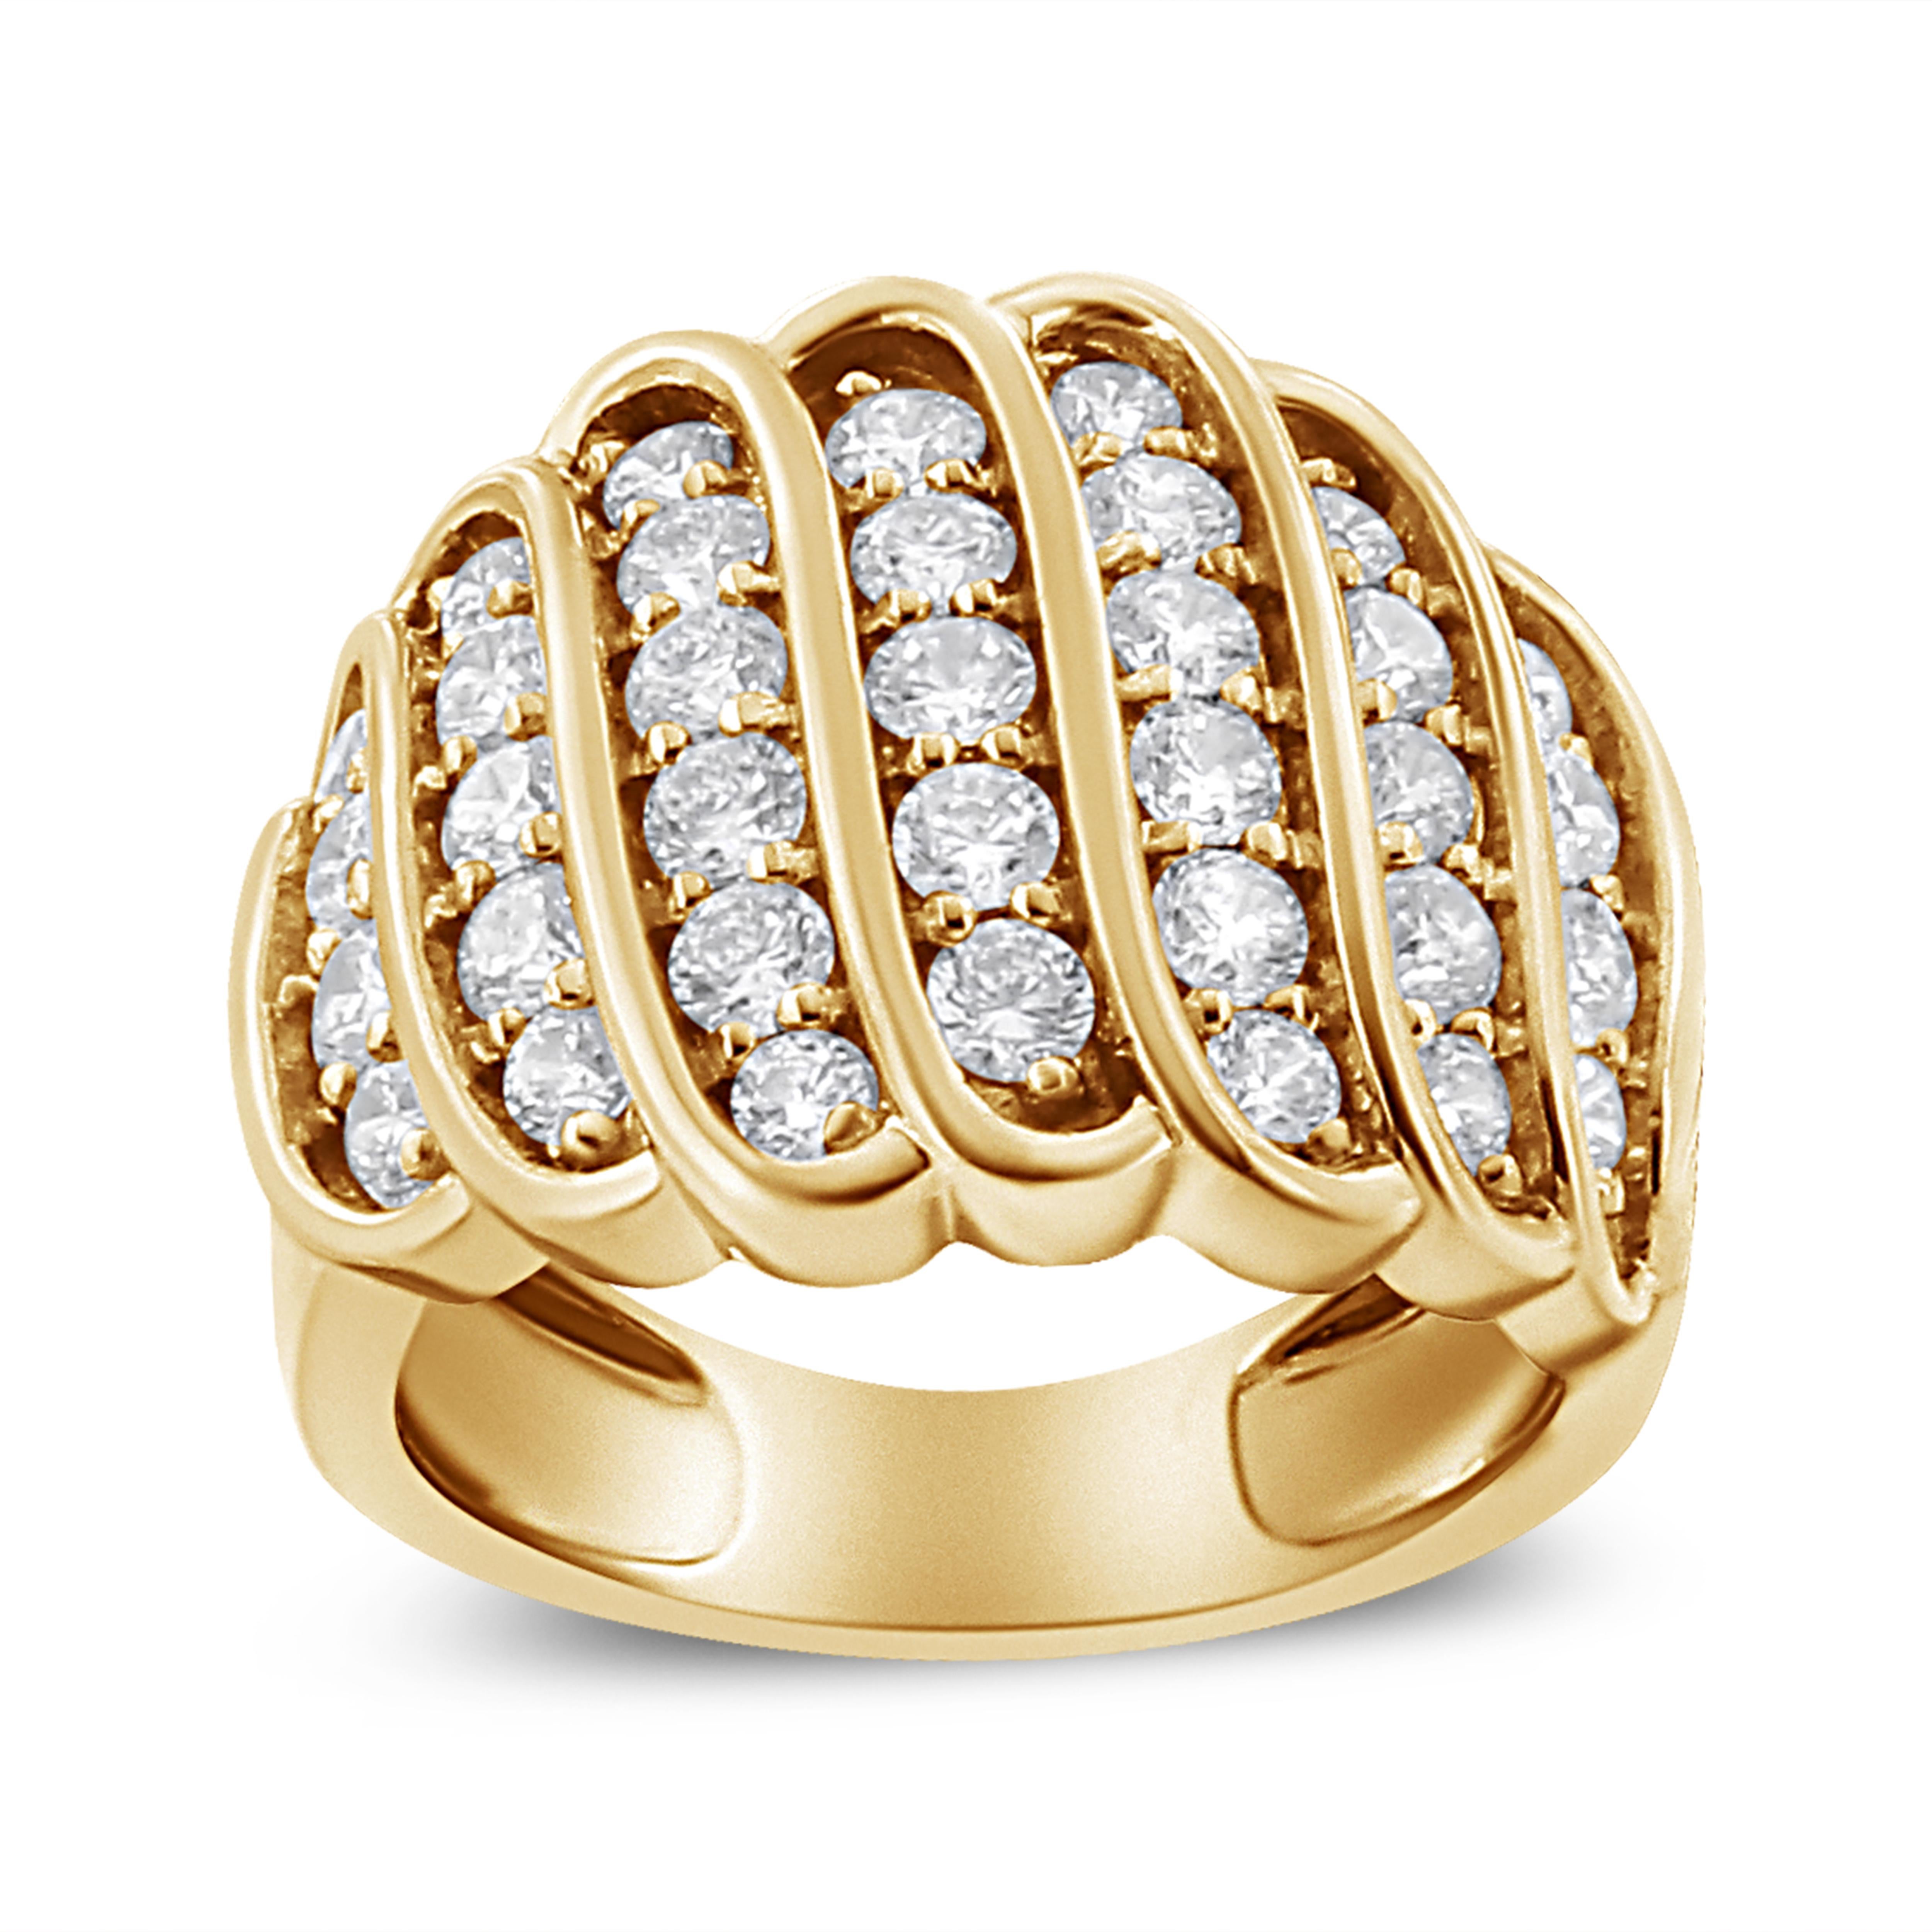 Strikingly beautiful, this stunning multi-row diamond band ring is crafted from genuine .925 sterling silver and plated with sparkling 14k yellow gold, a metal that will stay tarnish free for years to come! The ring has a vertical multi-row design